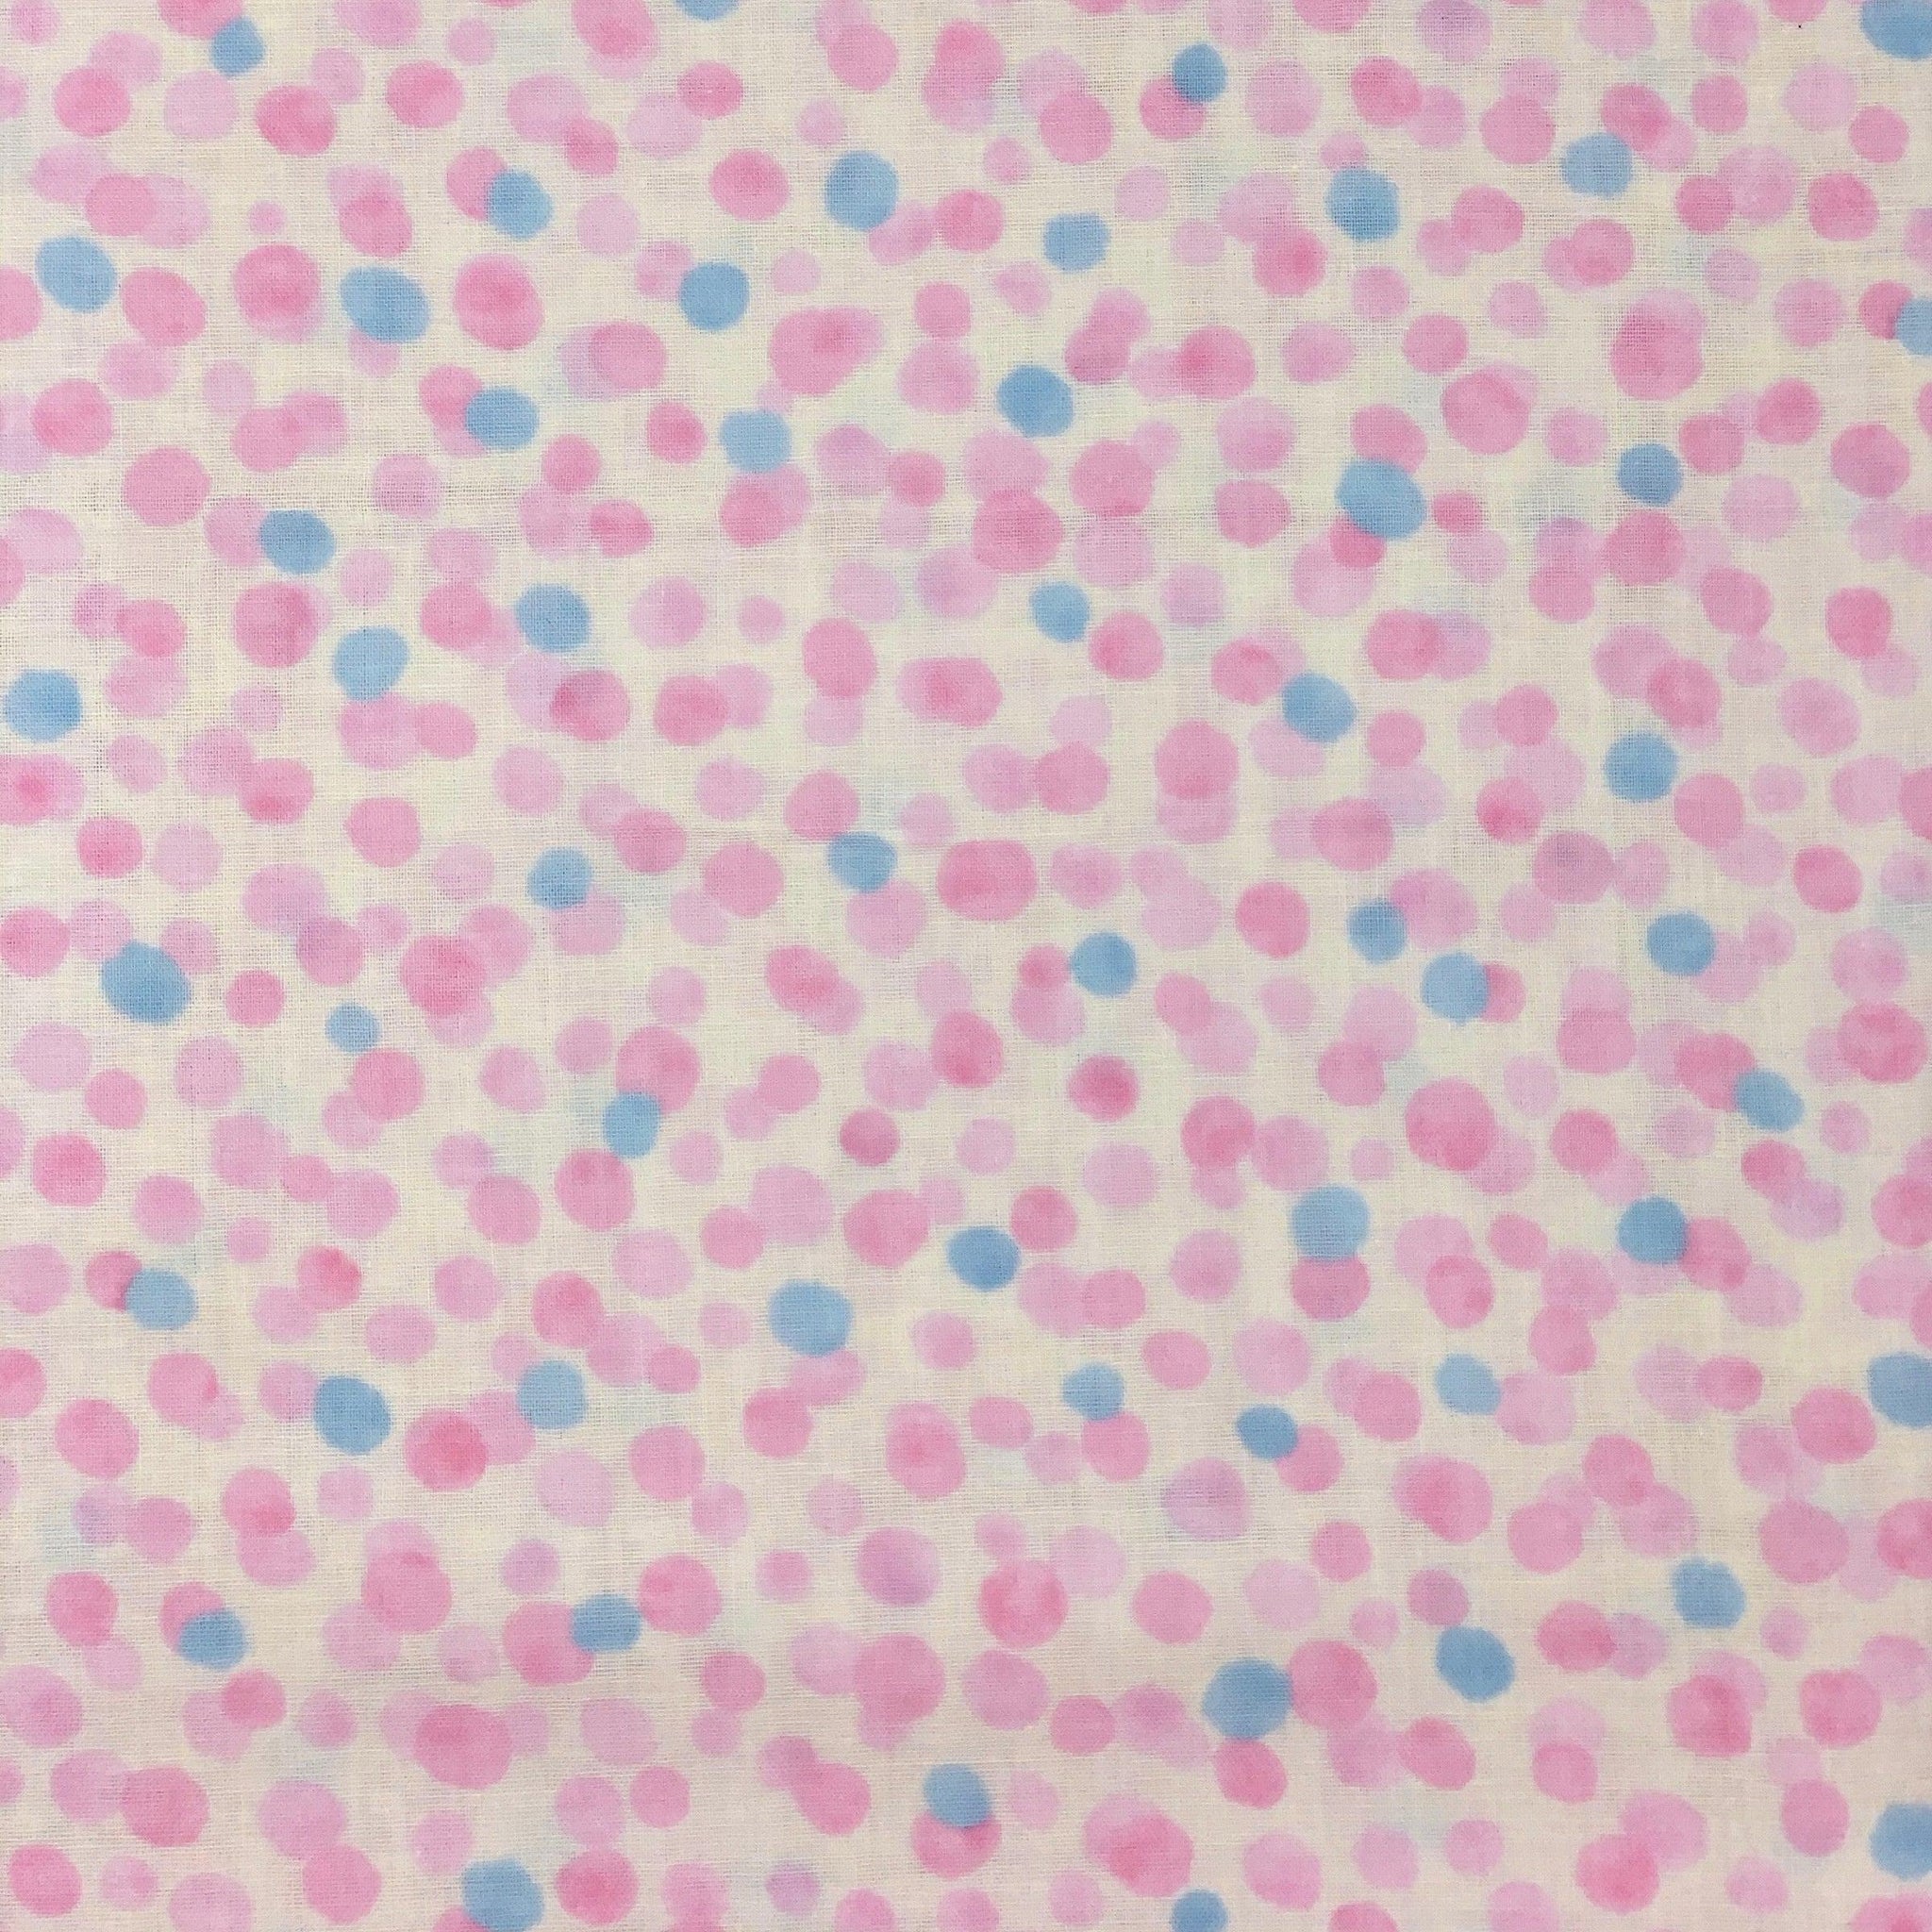 Kokka-Soft Pink/Blue Dots on Cotton Double Gauze-fabric-gather here online